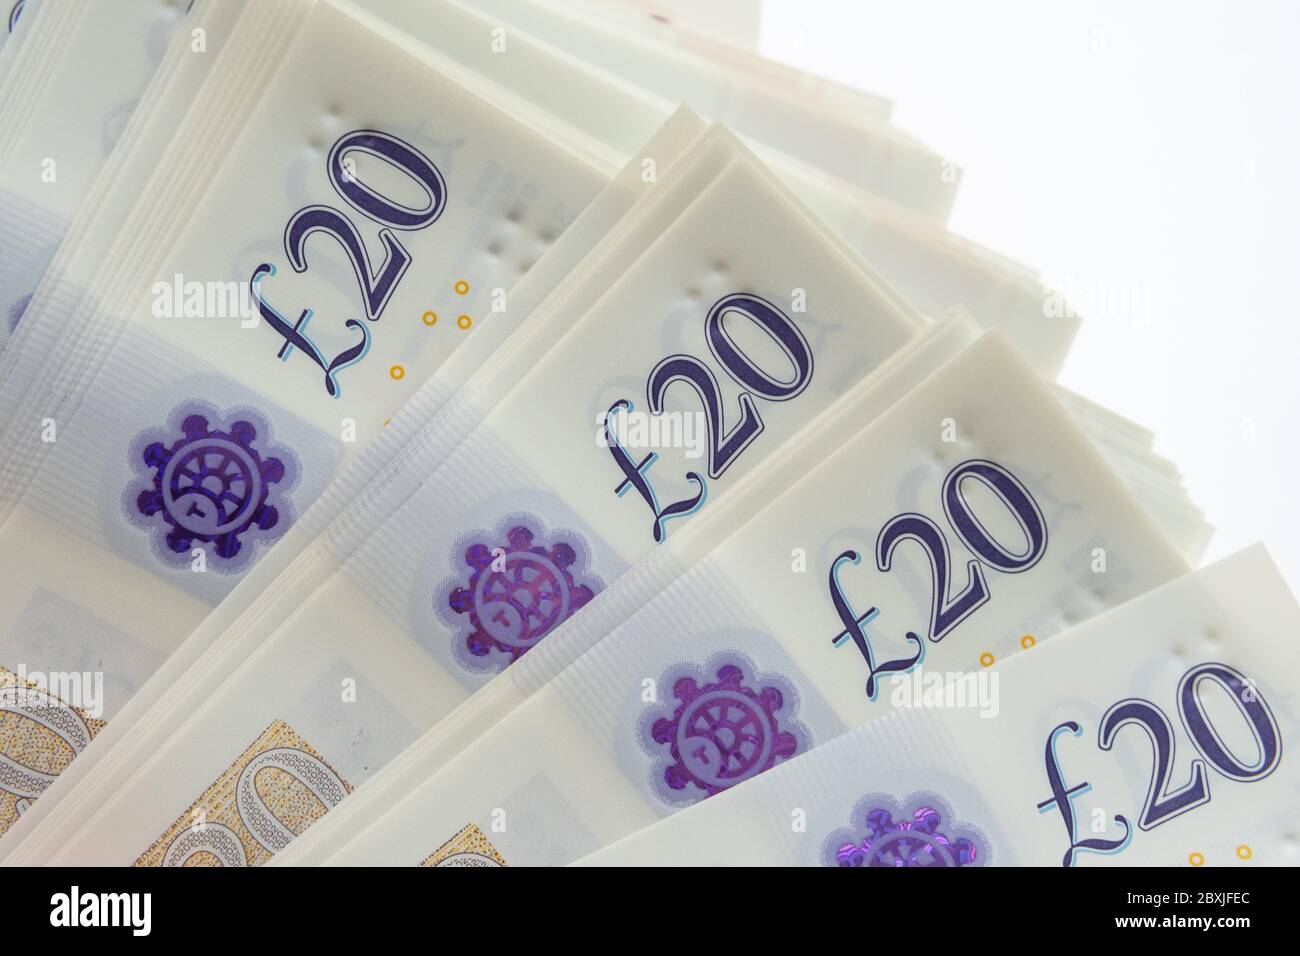 Corner of the stack of 20 pound banknotes isolated on white. Photo of new polymer 20 pound note released in februrary 2020 in the United Kingdom. Stock Photo